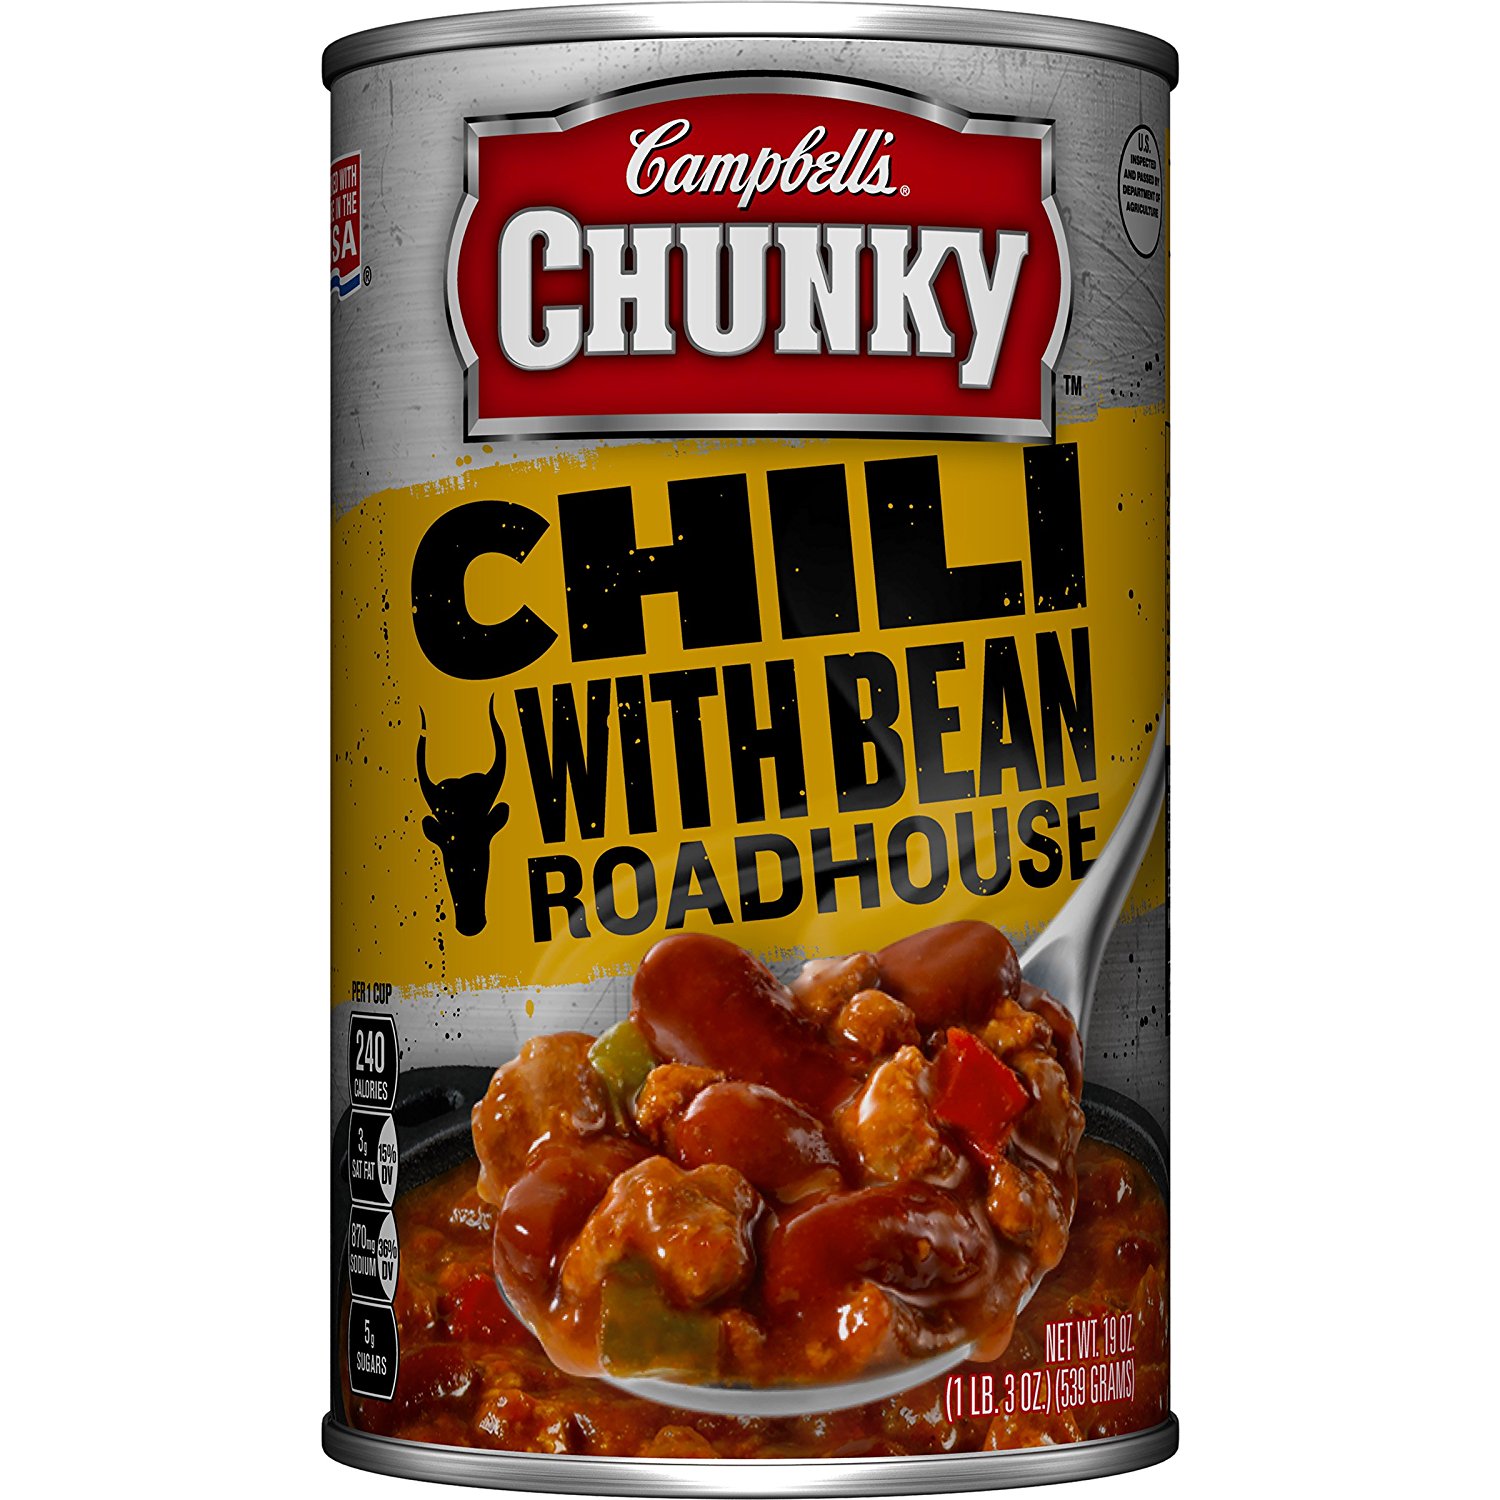 Campbell S Chunky Chili Beef Bean Roadhouse 19 Oz Pack Of 4 Wf Shopping